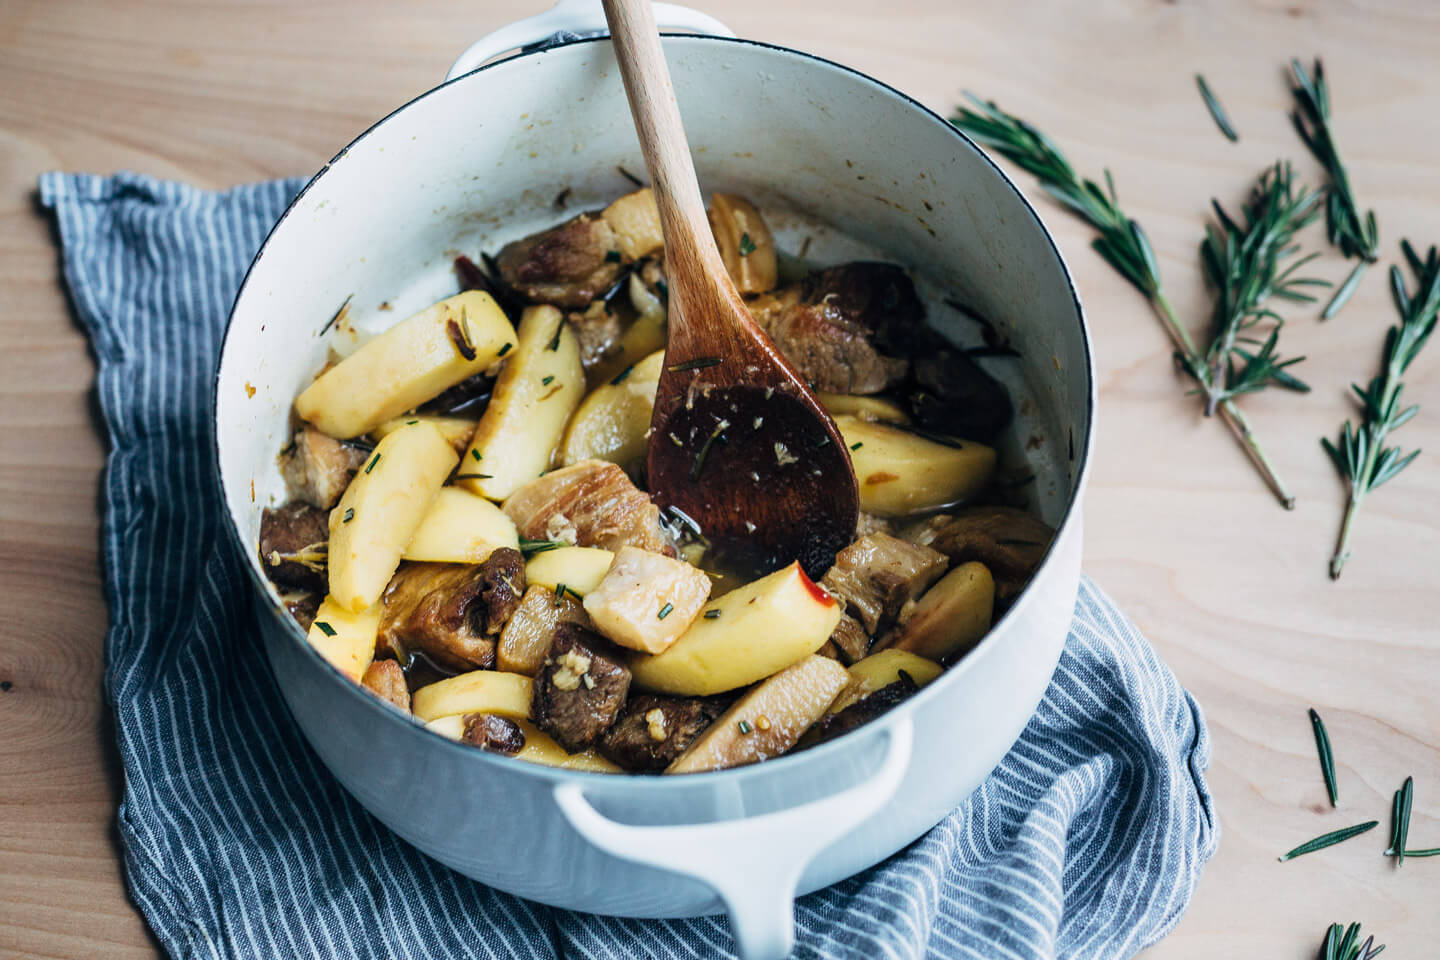 A simple and savory wintry stew featuring braised pork with apples, rosemary, chilies, and citrus served over polenta. 